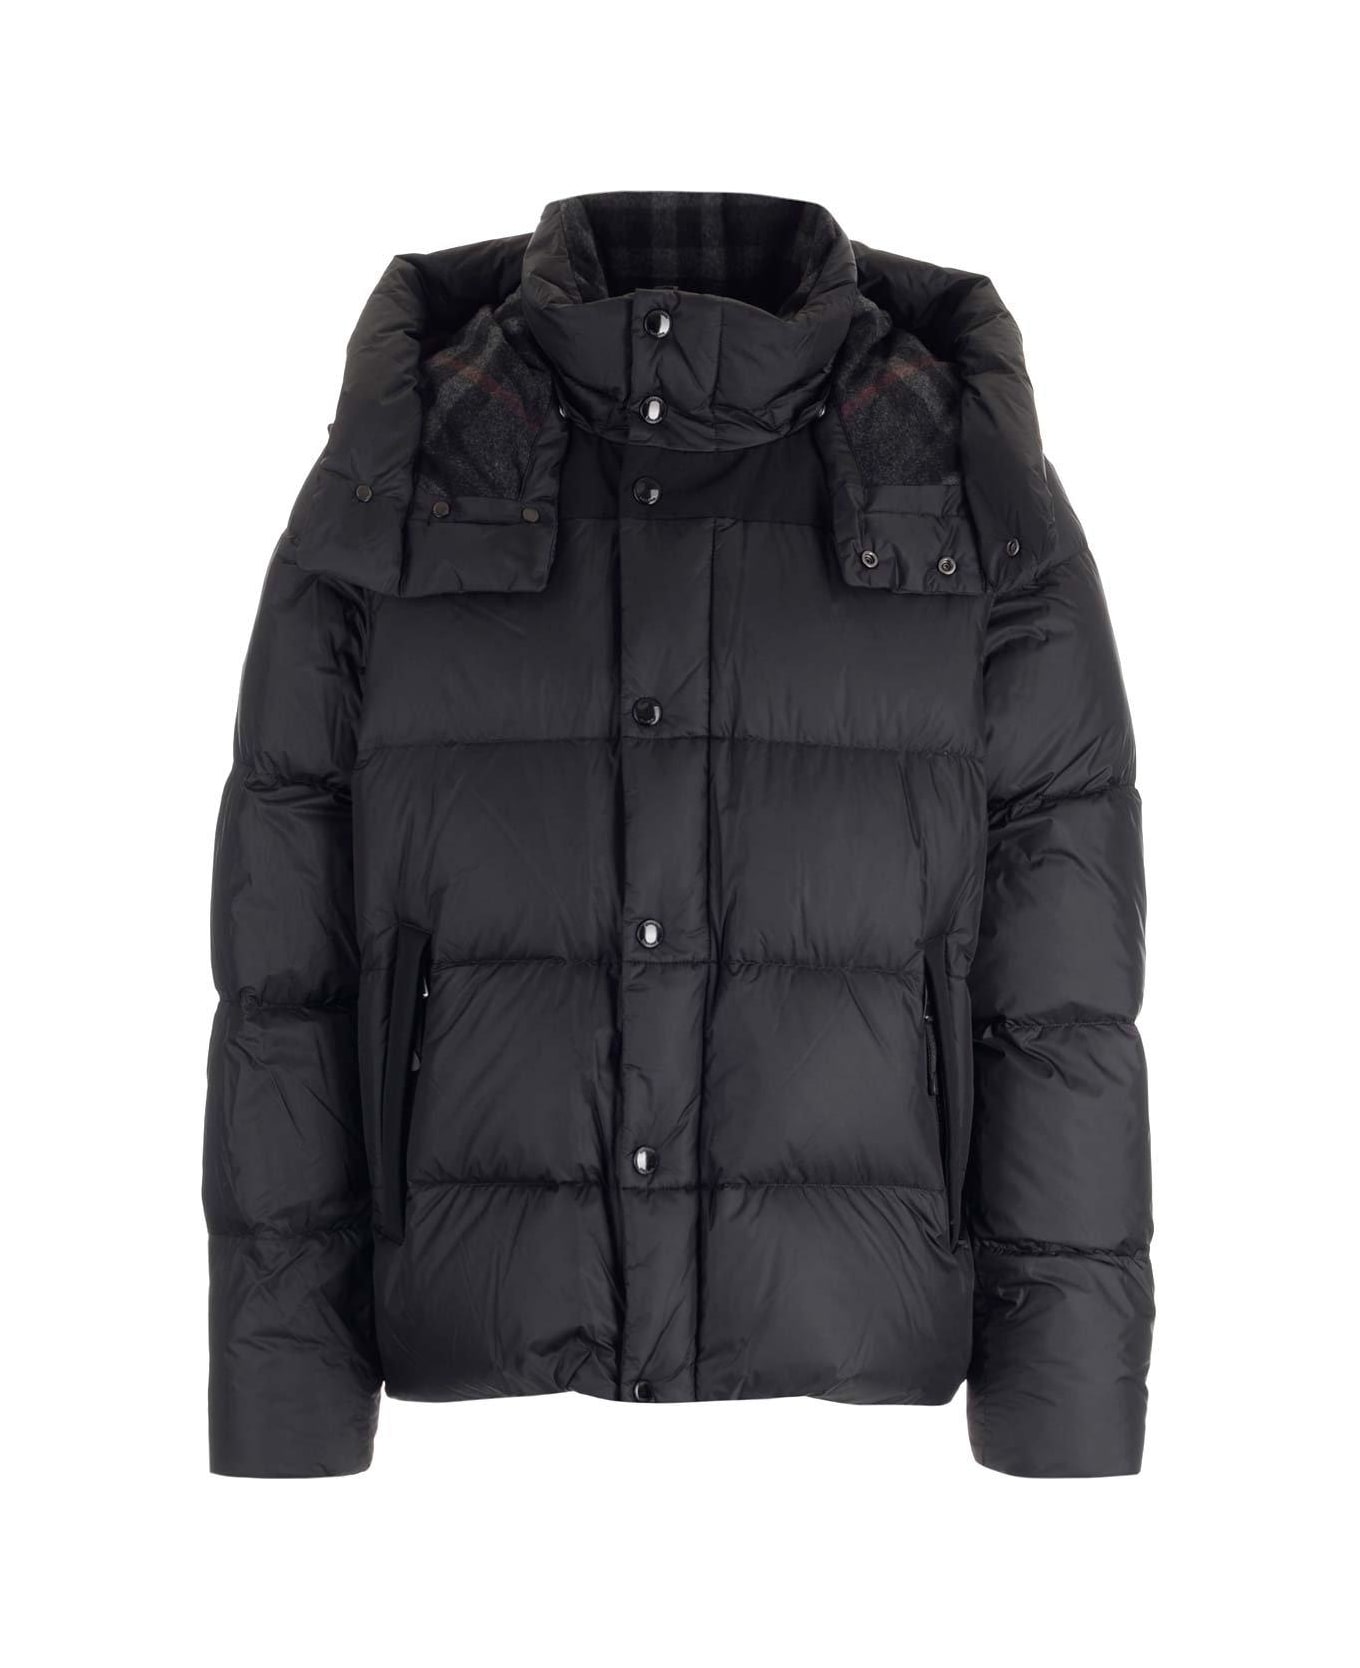 Burberry Logo Patch Hooded Puffer Jacket - Black